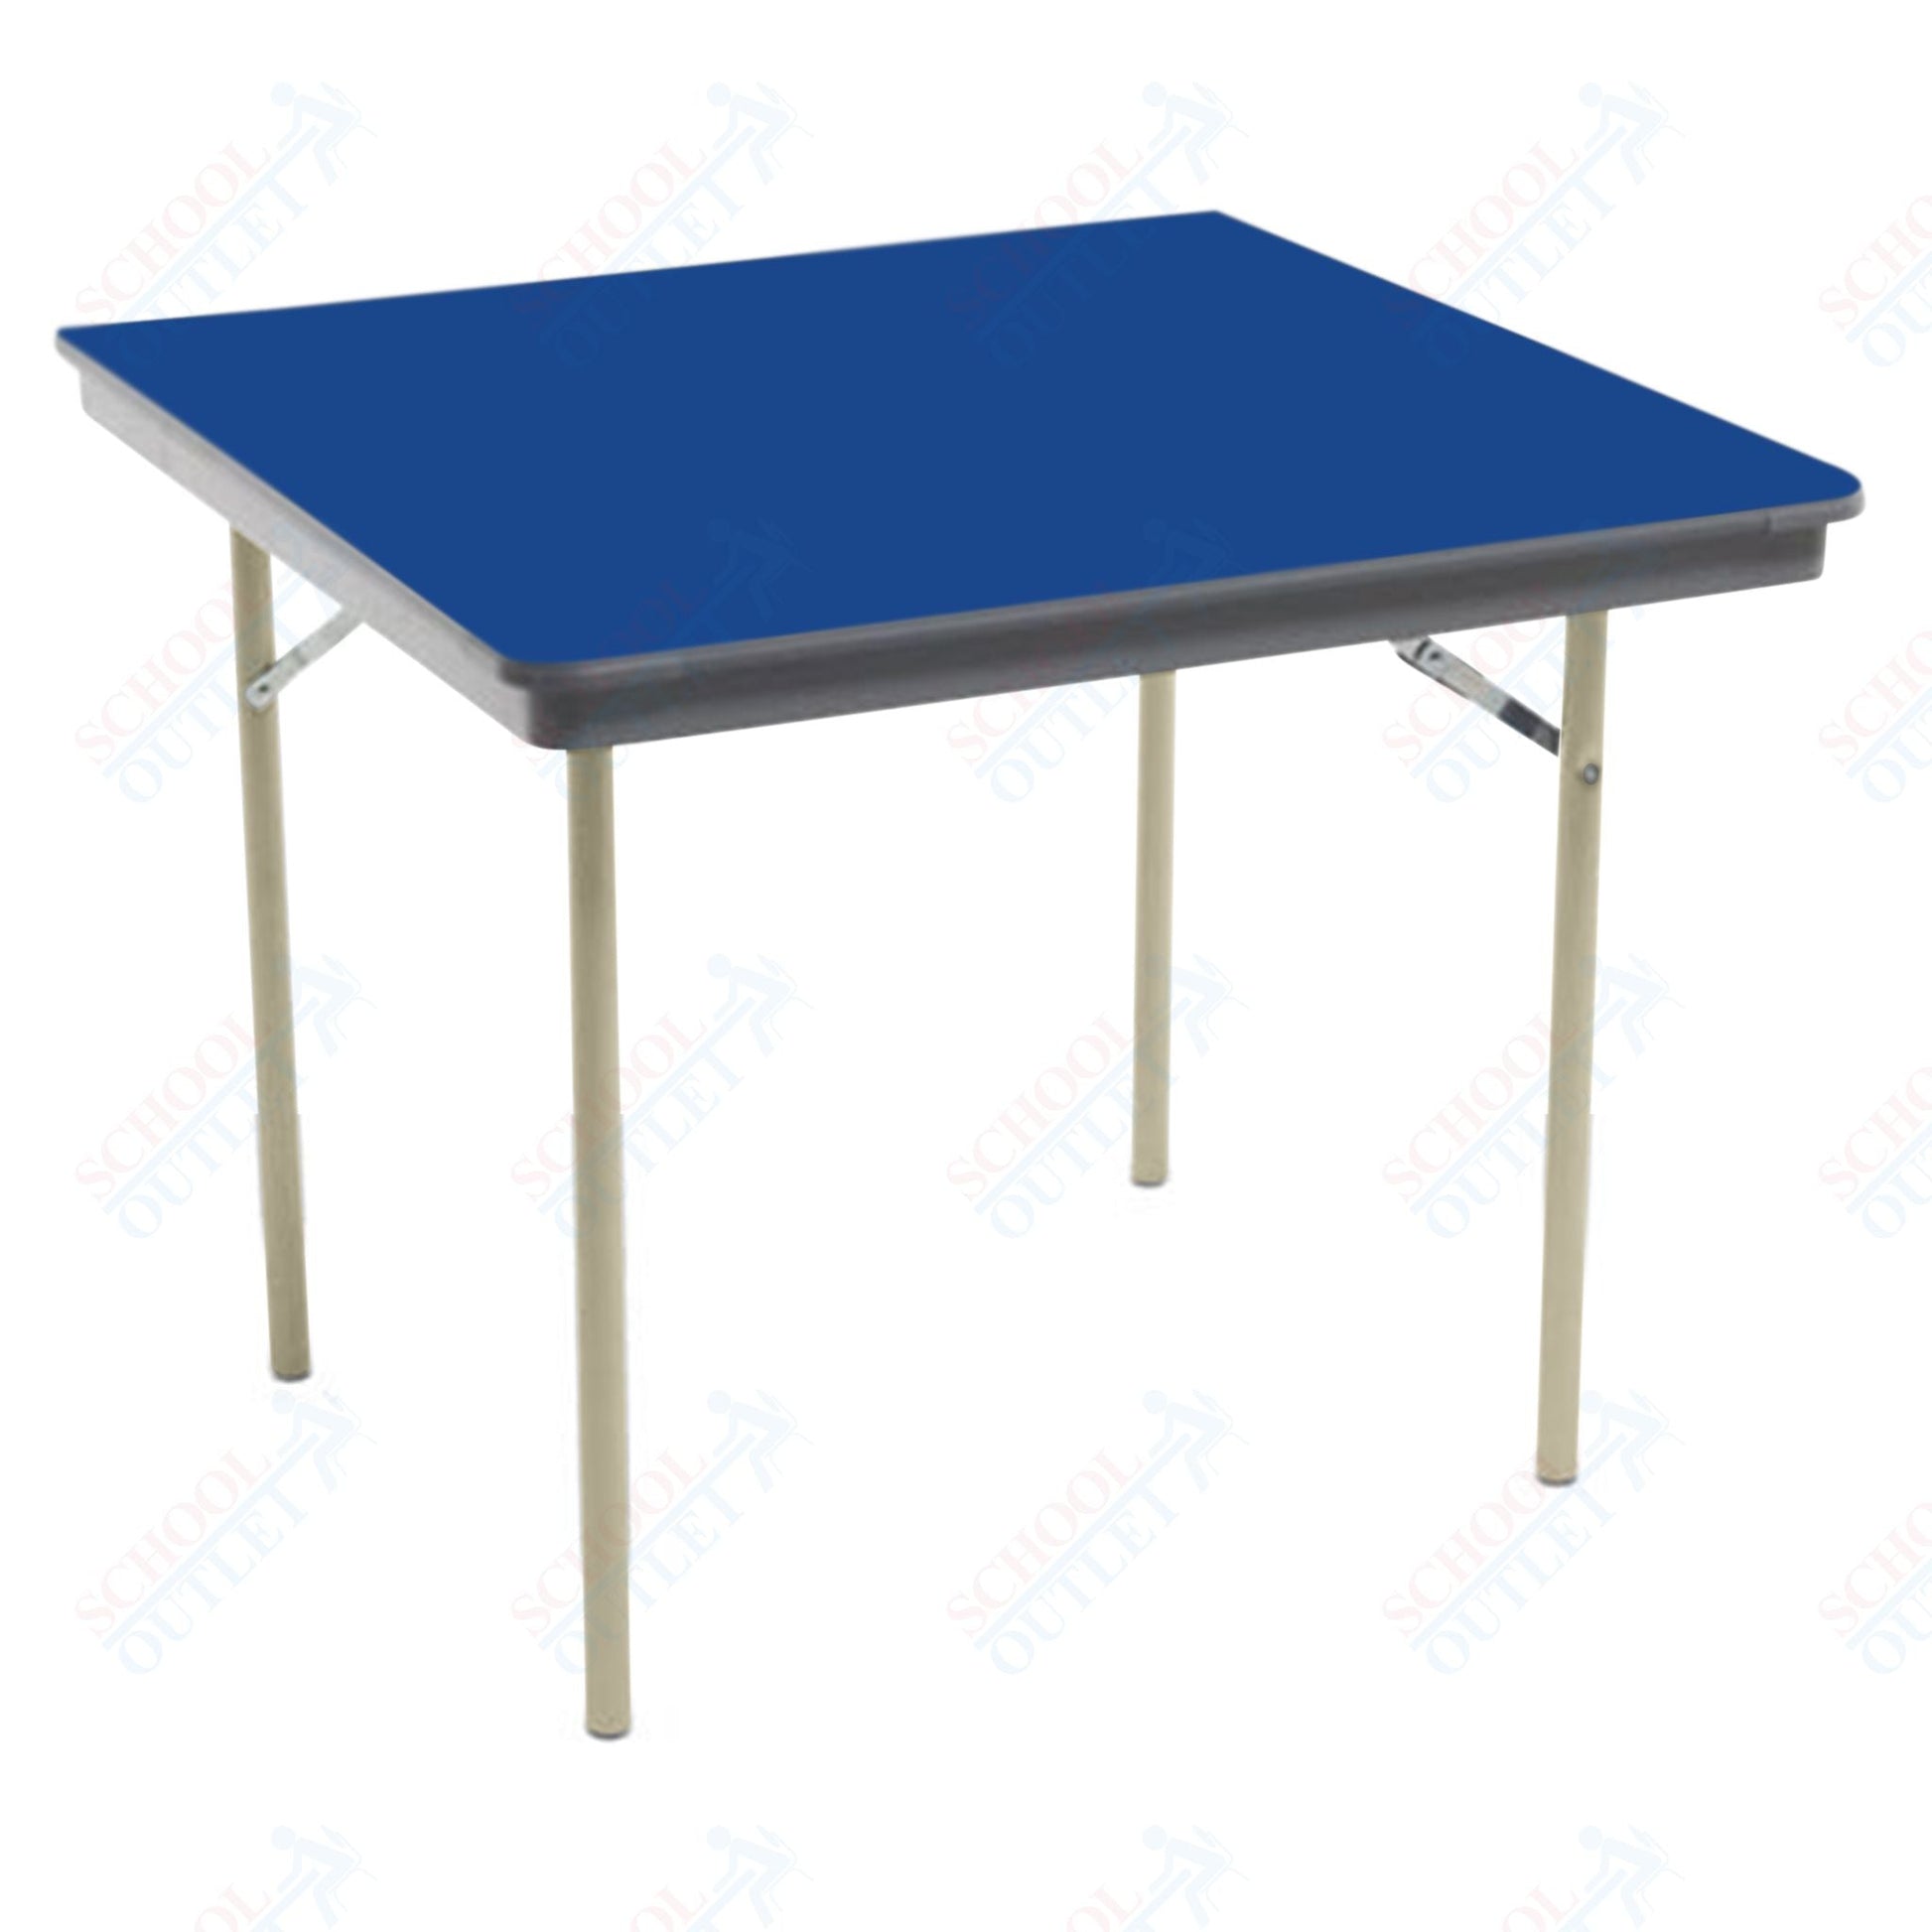 AmTab Dynalite Featherweight Heavy - Duty ABS Plastic Folding Table - Square - 48"W x 48"L x 29"H (AmTab AMT - SQ48DL) - SchoolOutlet